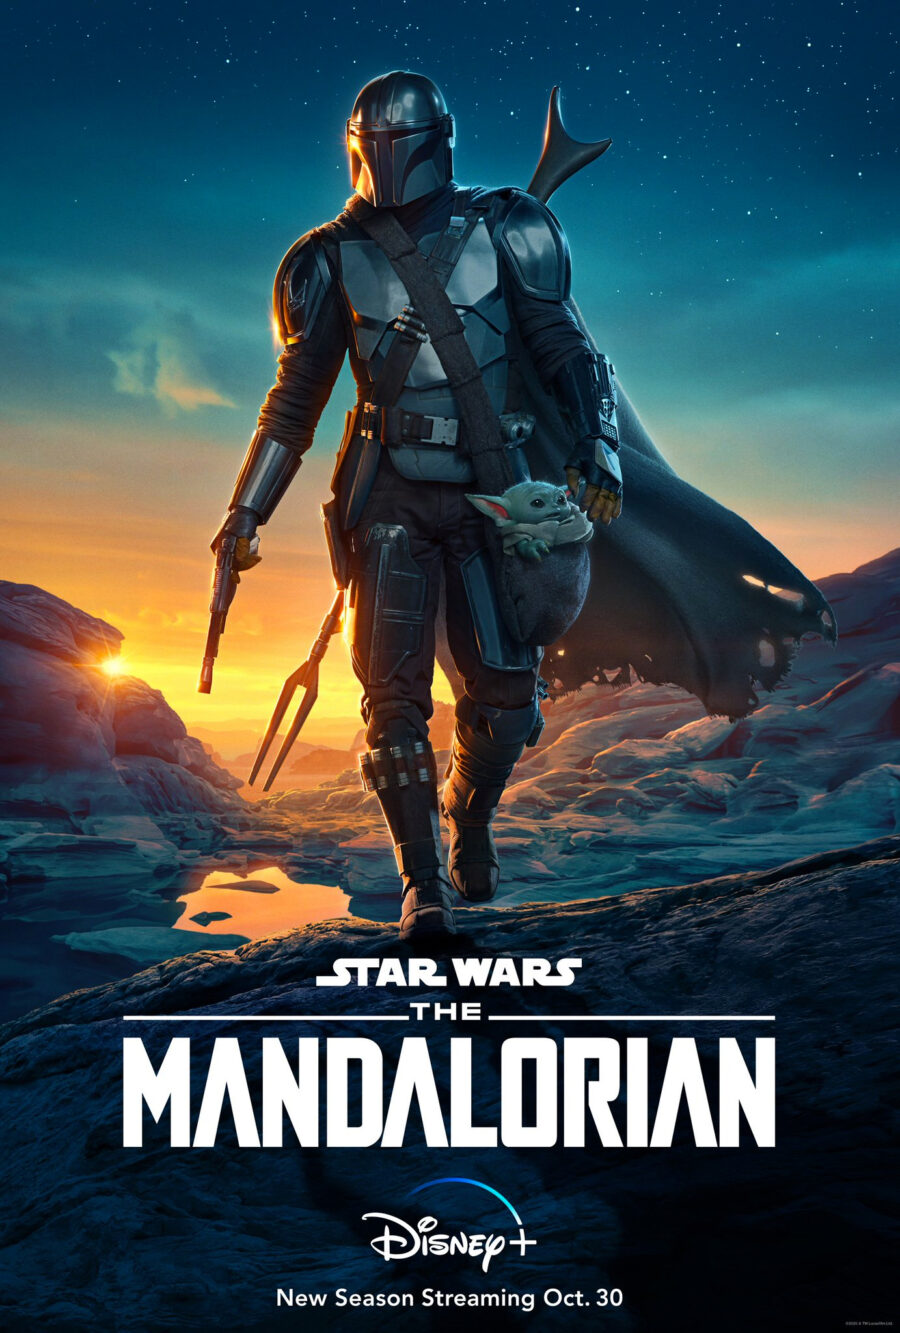 The Mandalorian Season 3 trailer reportedly releasing on Christmas day -  Bespin Bulletin